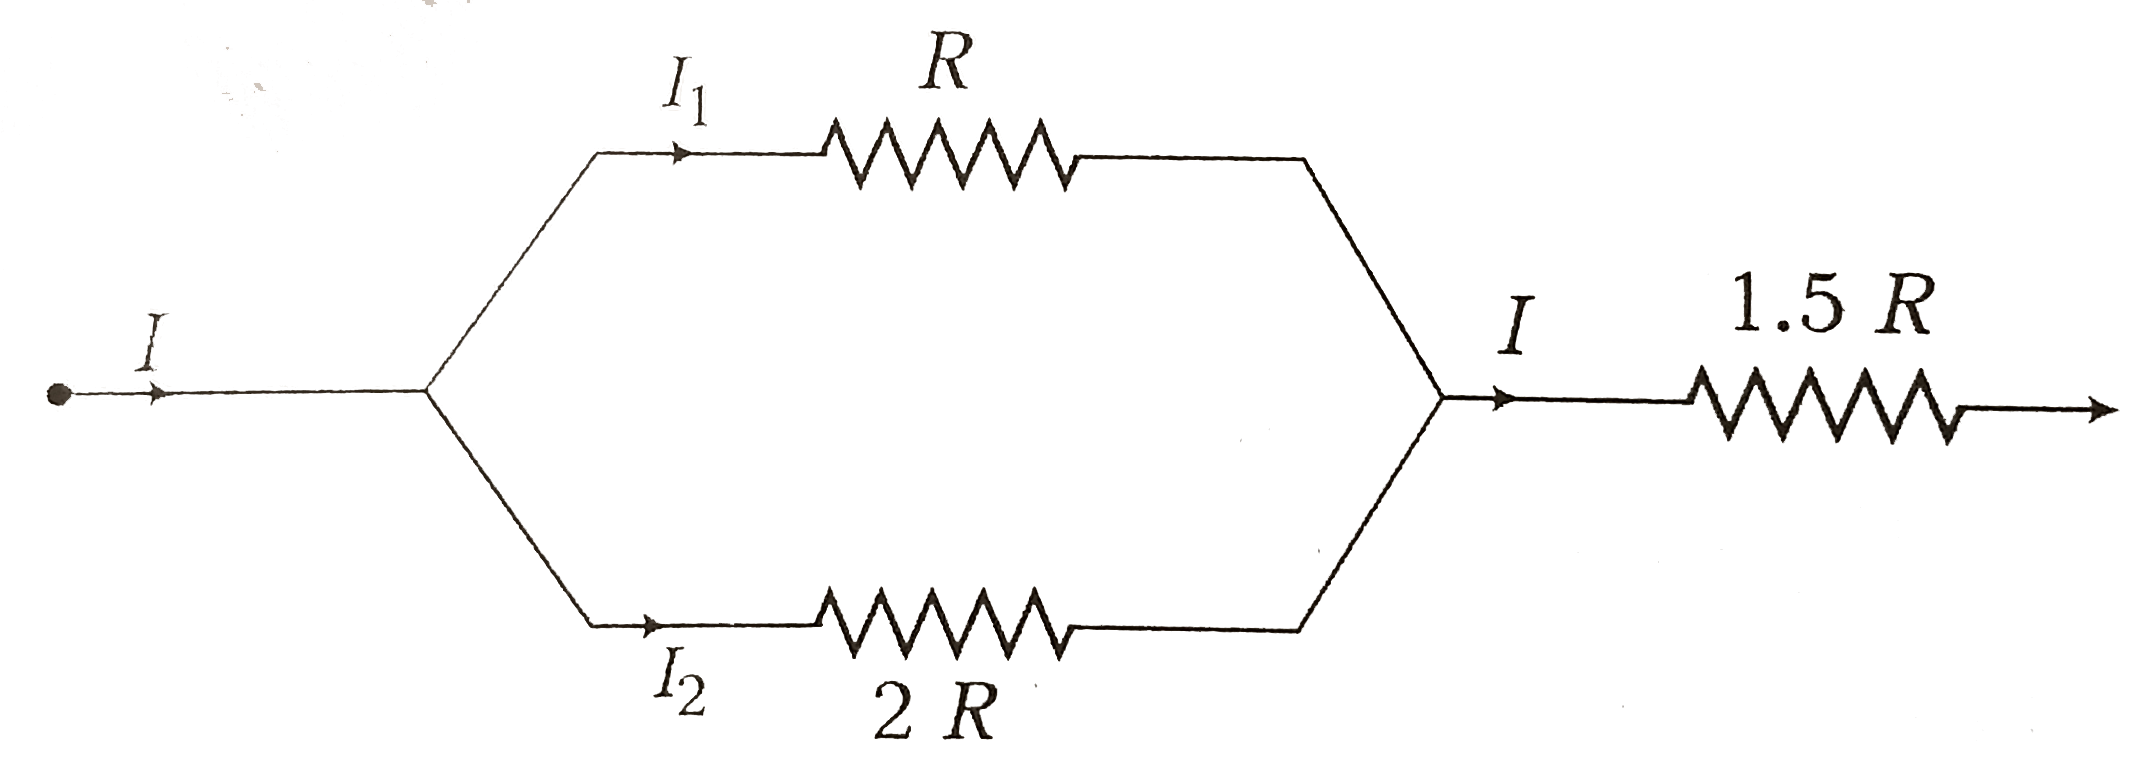 In the circuit diagram,heat produces in R, 2R and  1.5 R are in the ratio of